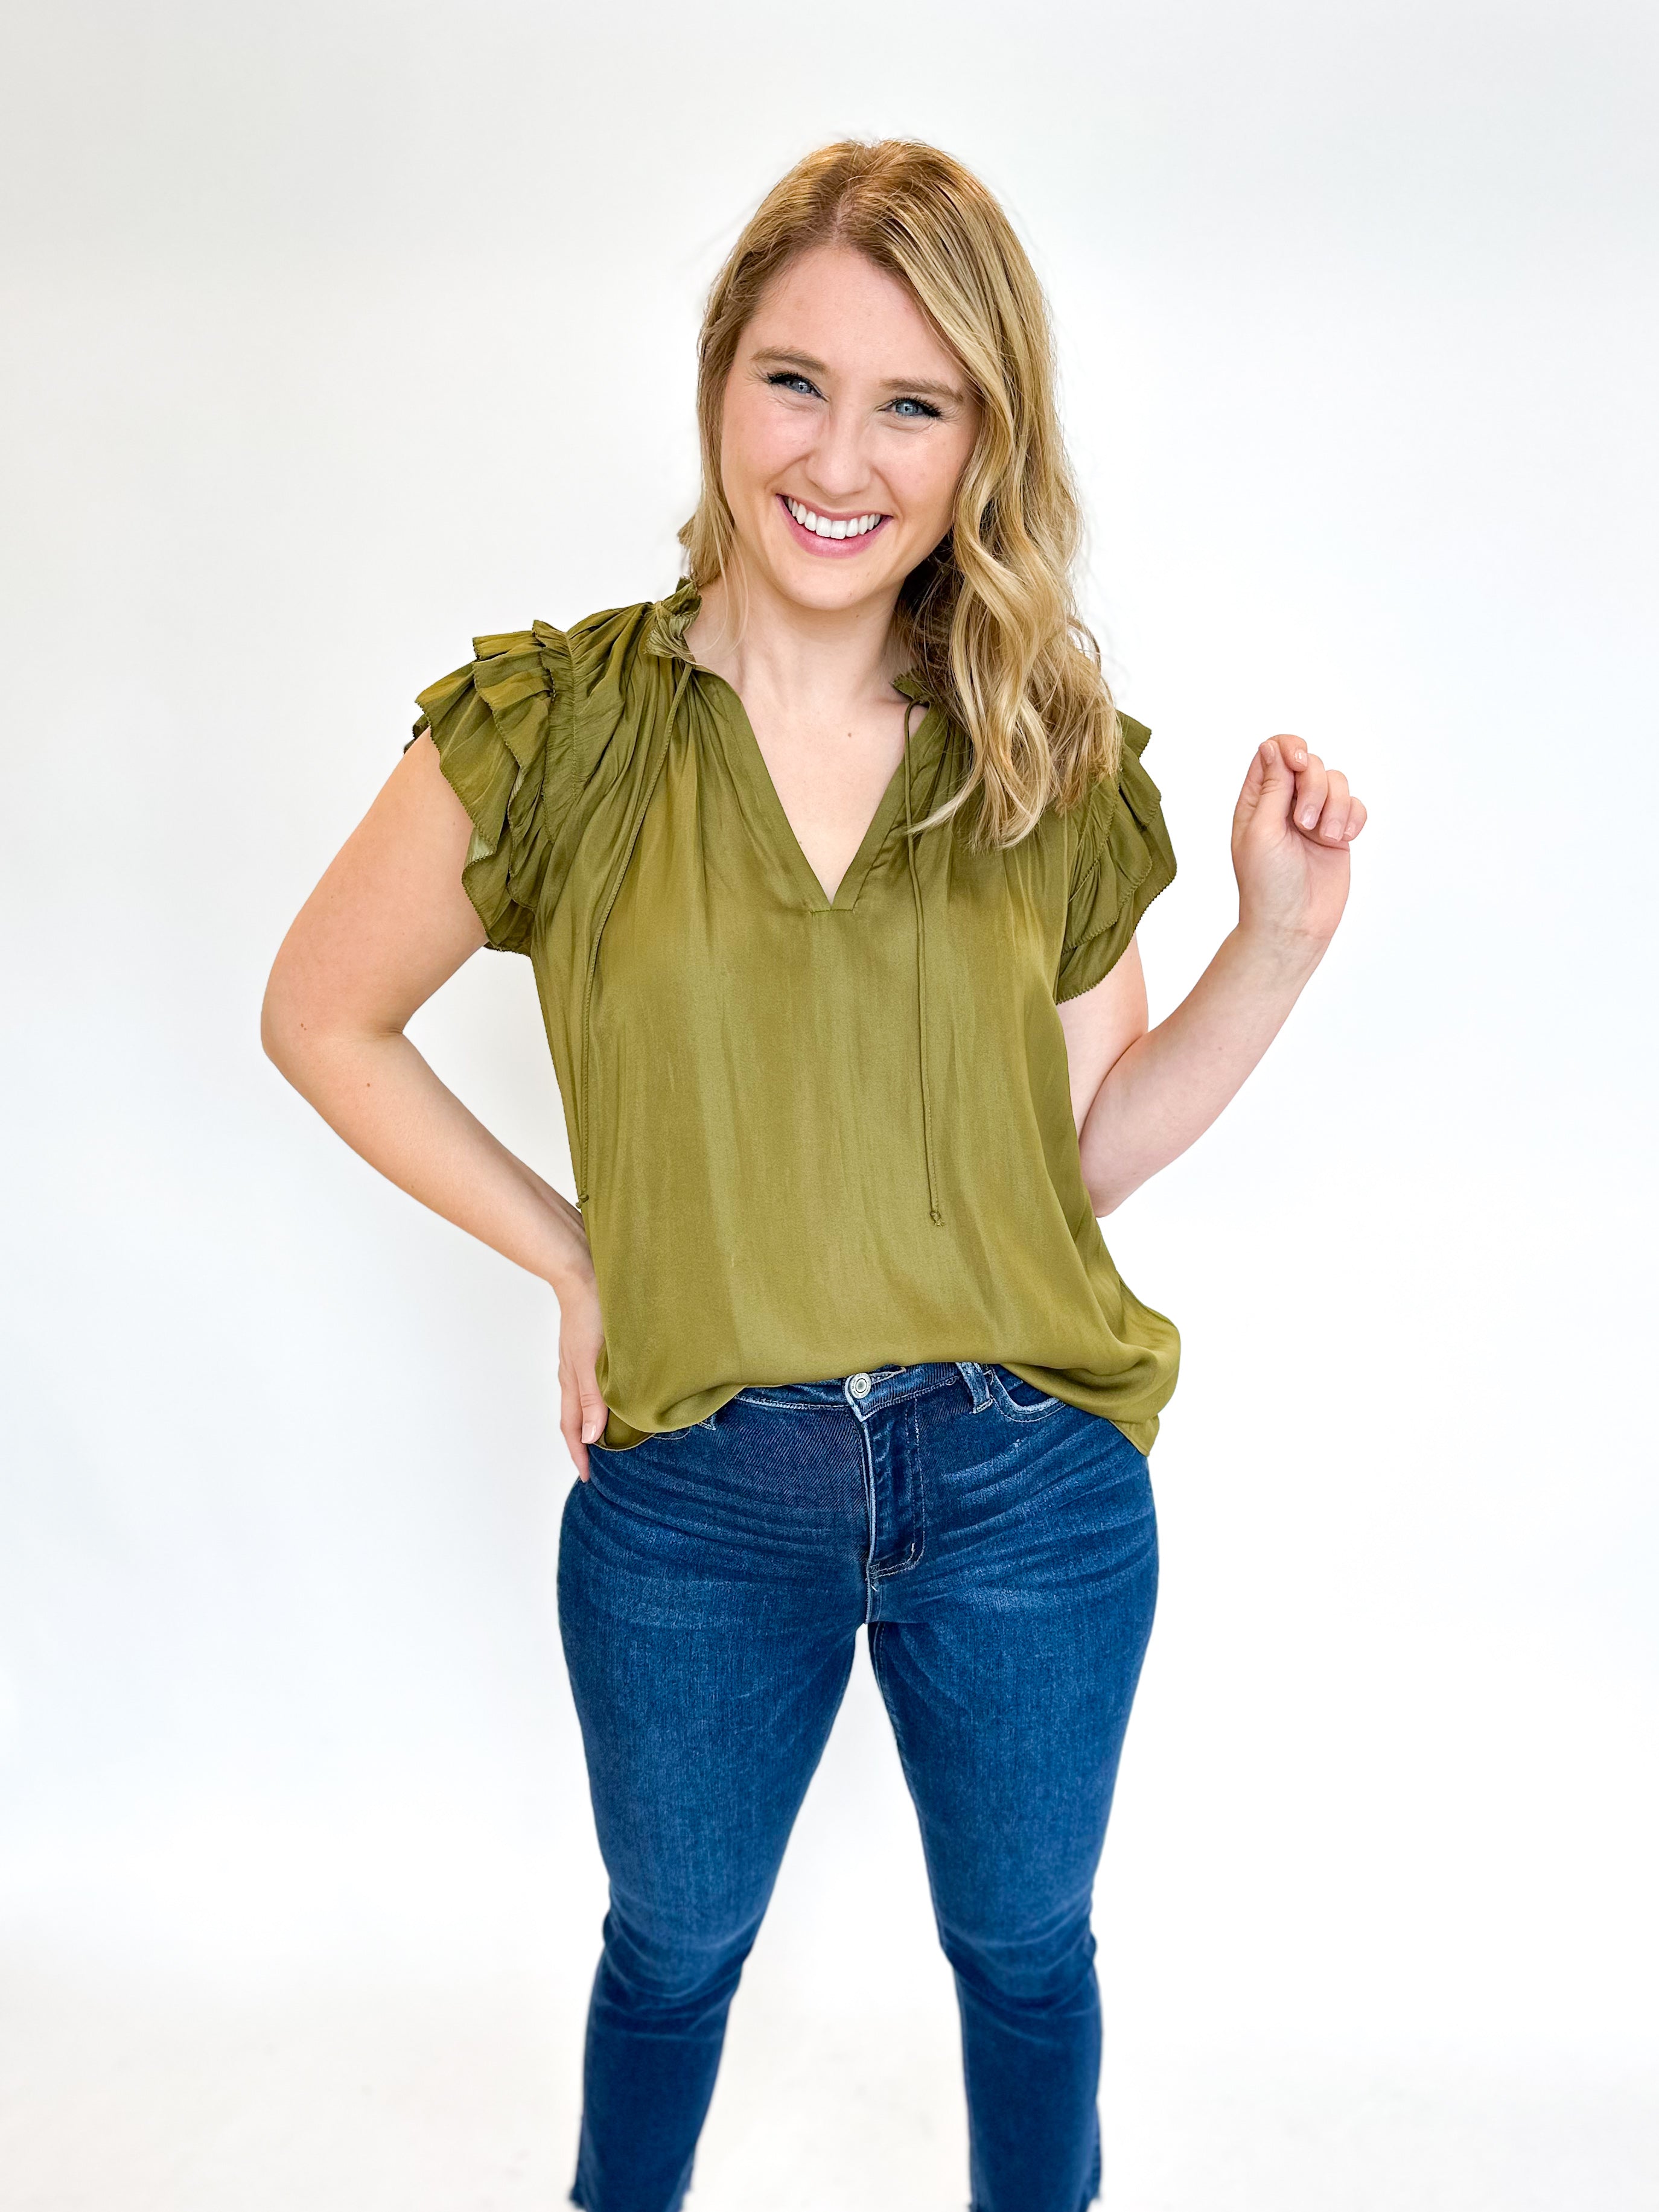 Your Holiday Satin Blouse - Mistletoe Green-200 Fashion Blouses-GRADE & GATHER-July & June Women's Fashion Boutique Located in San Antonio, Texas